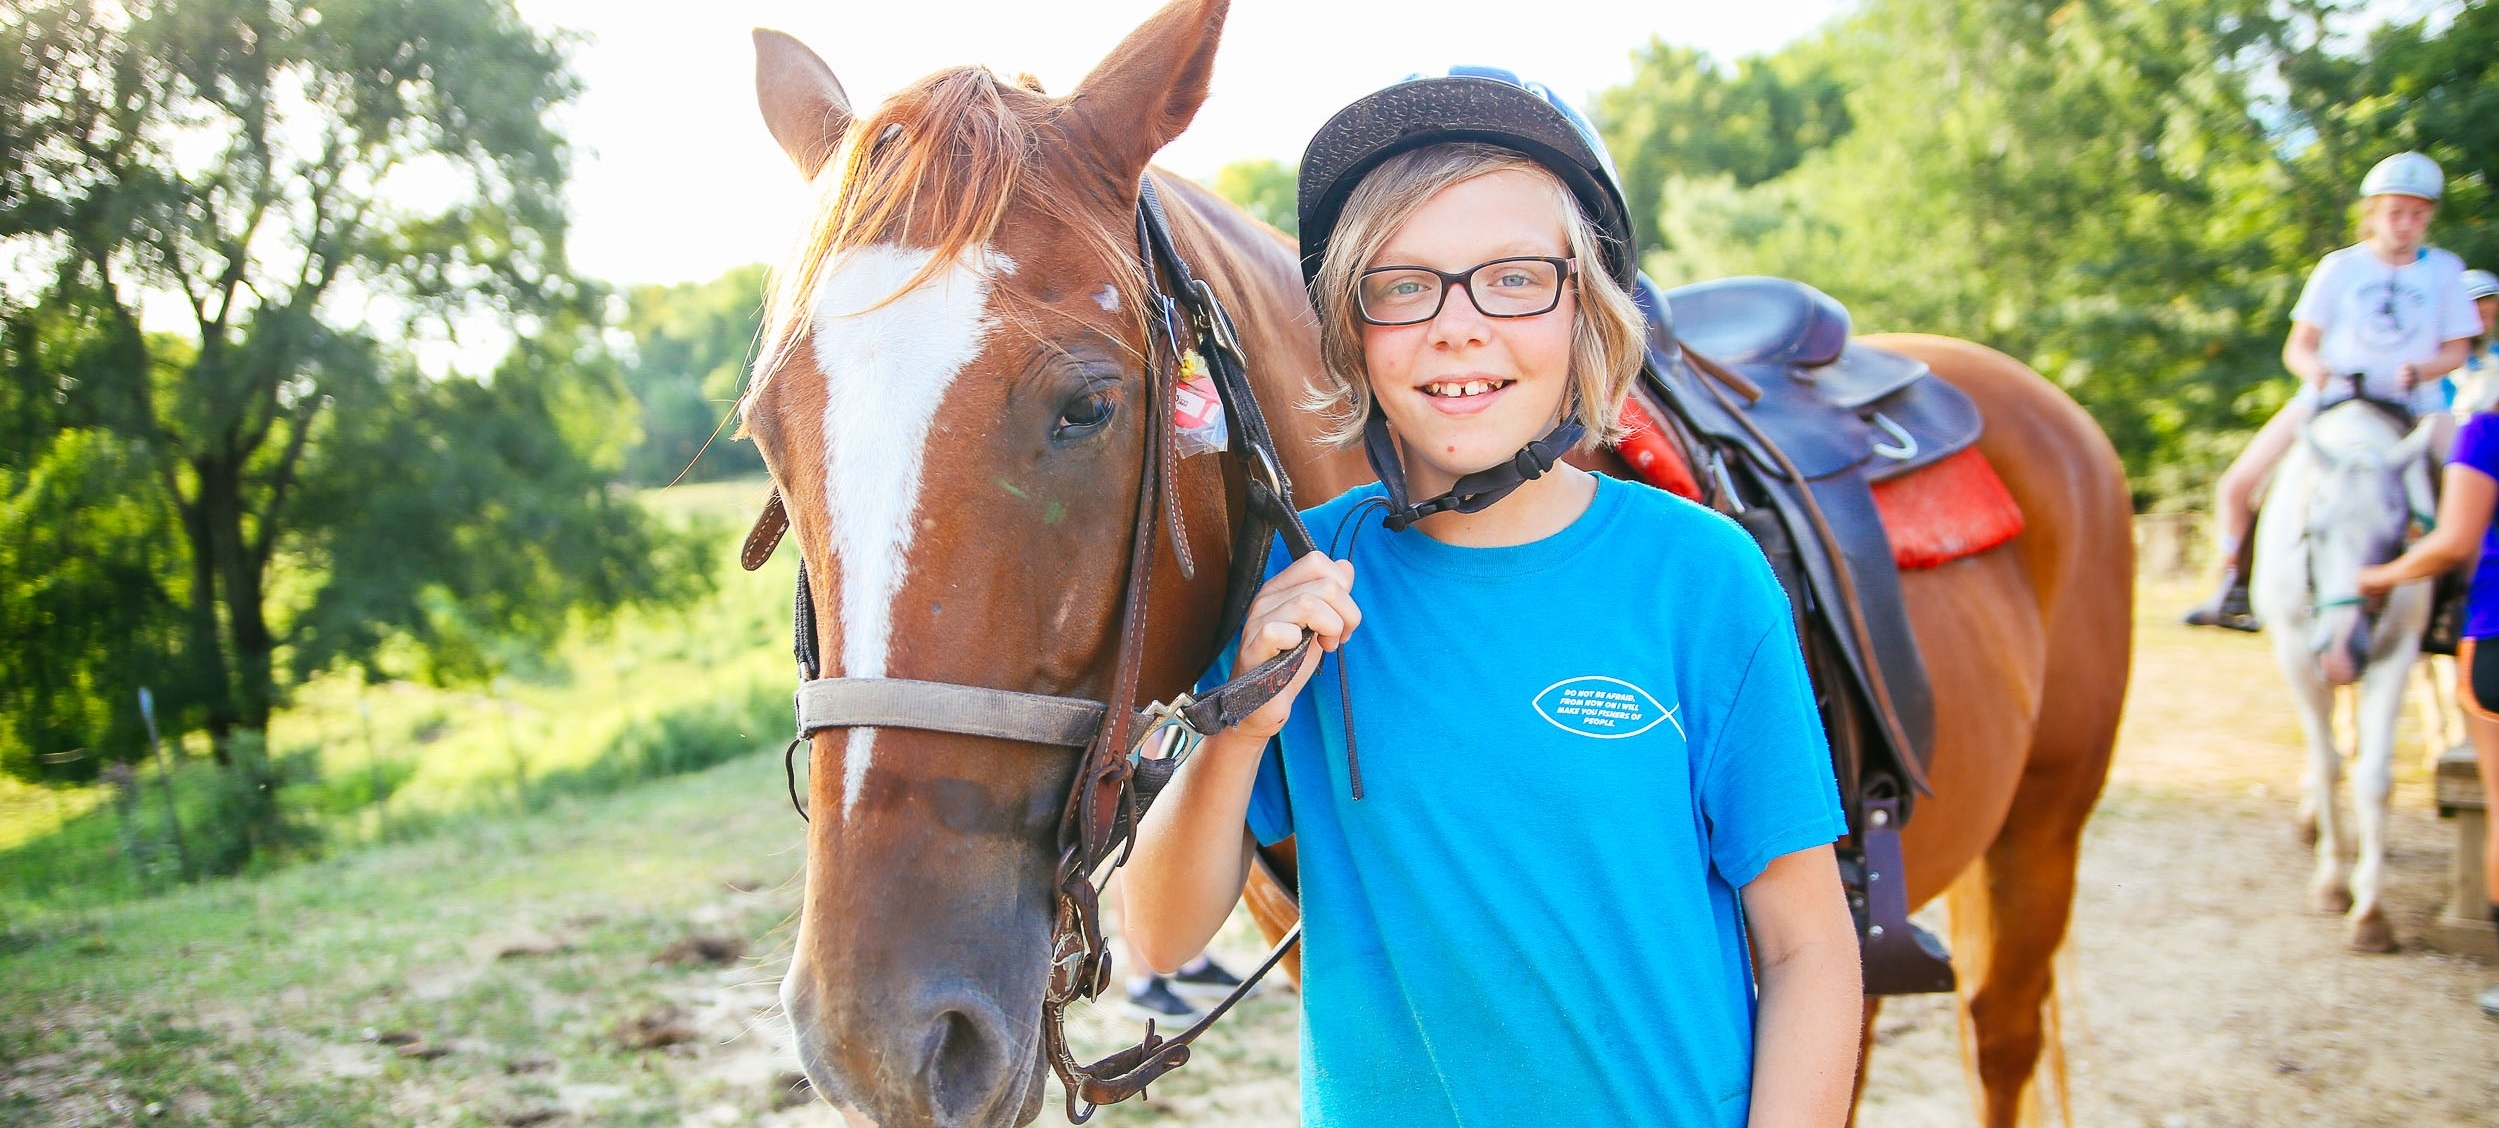 DID YOU KNOW?? Heartland has summer camps, too!